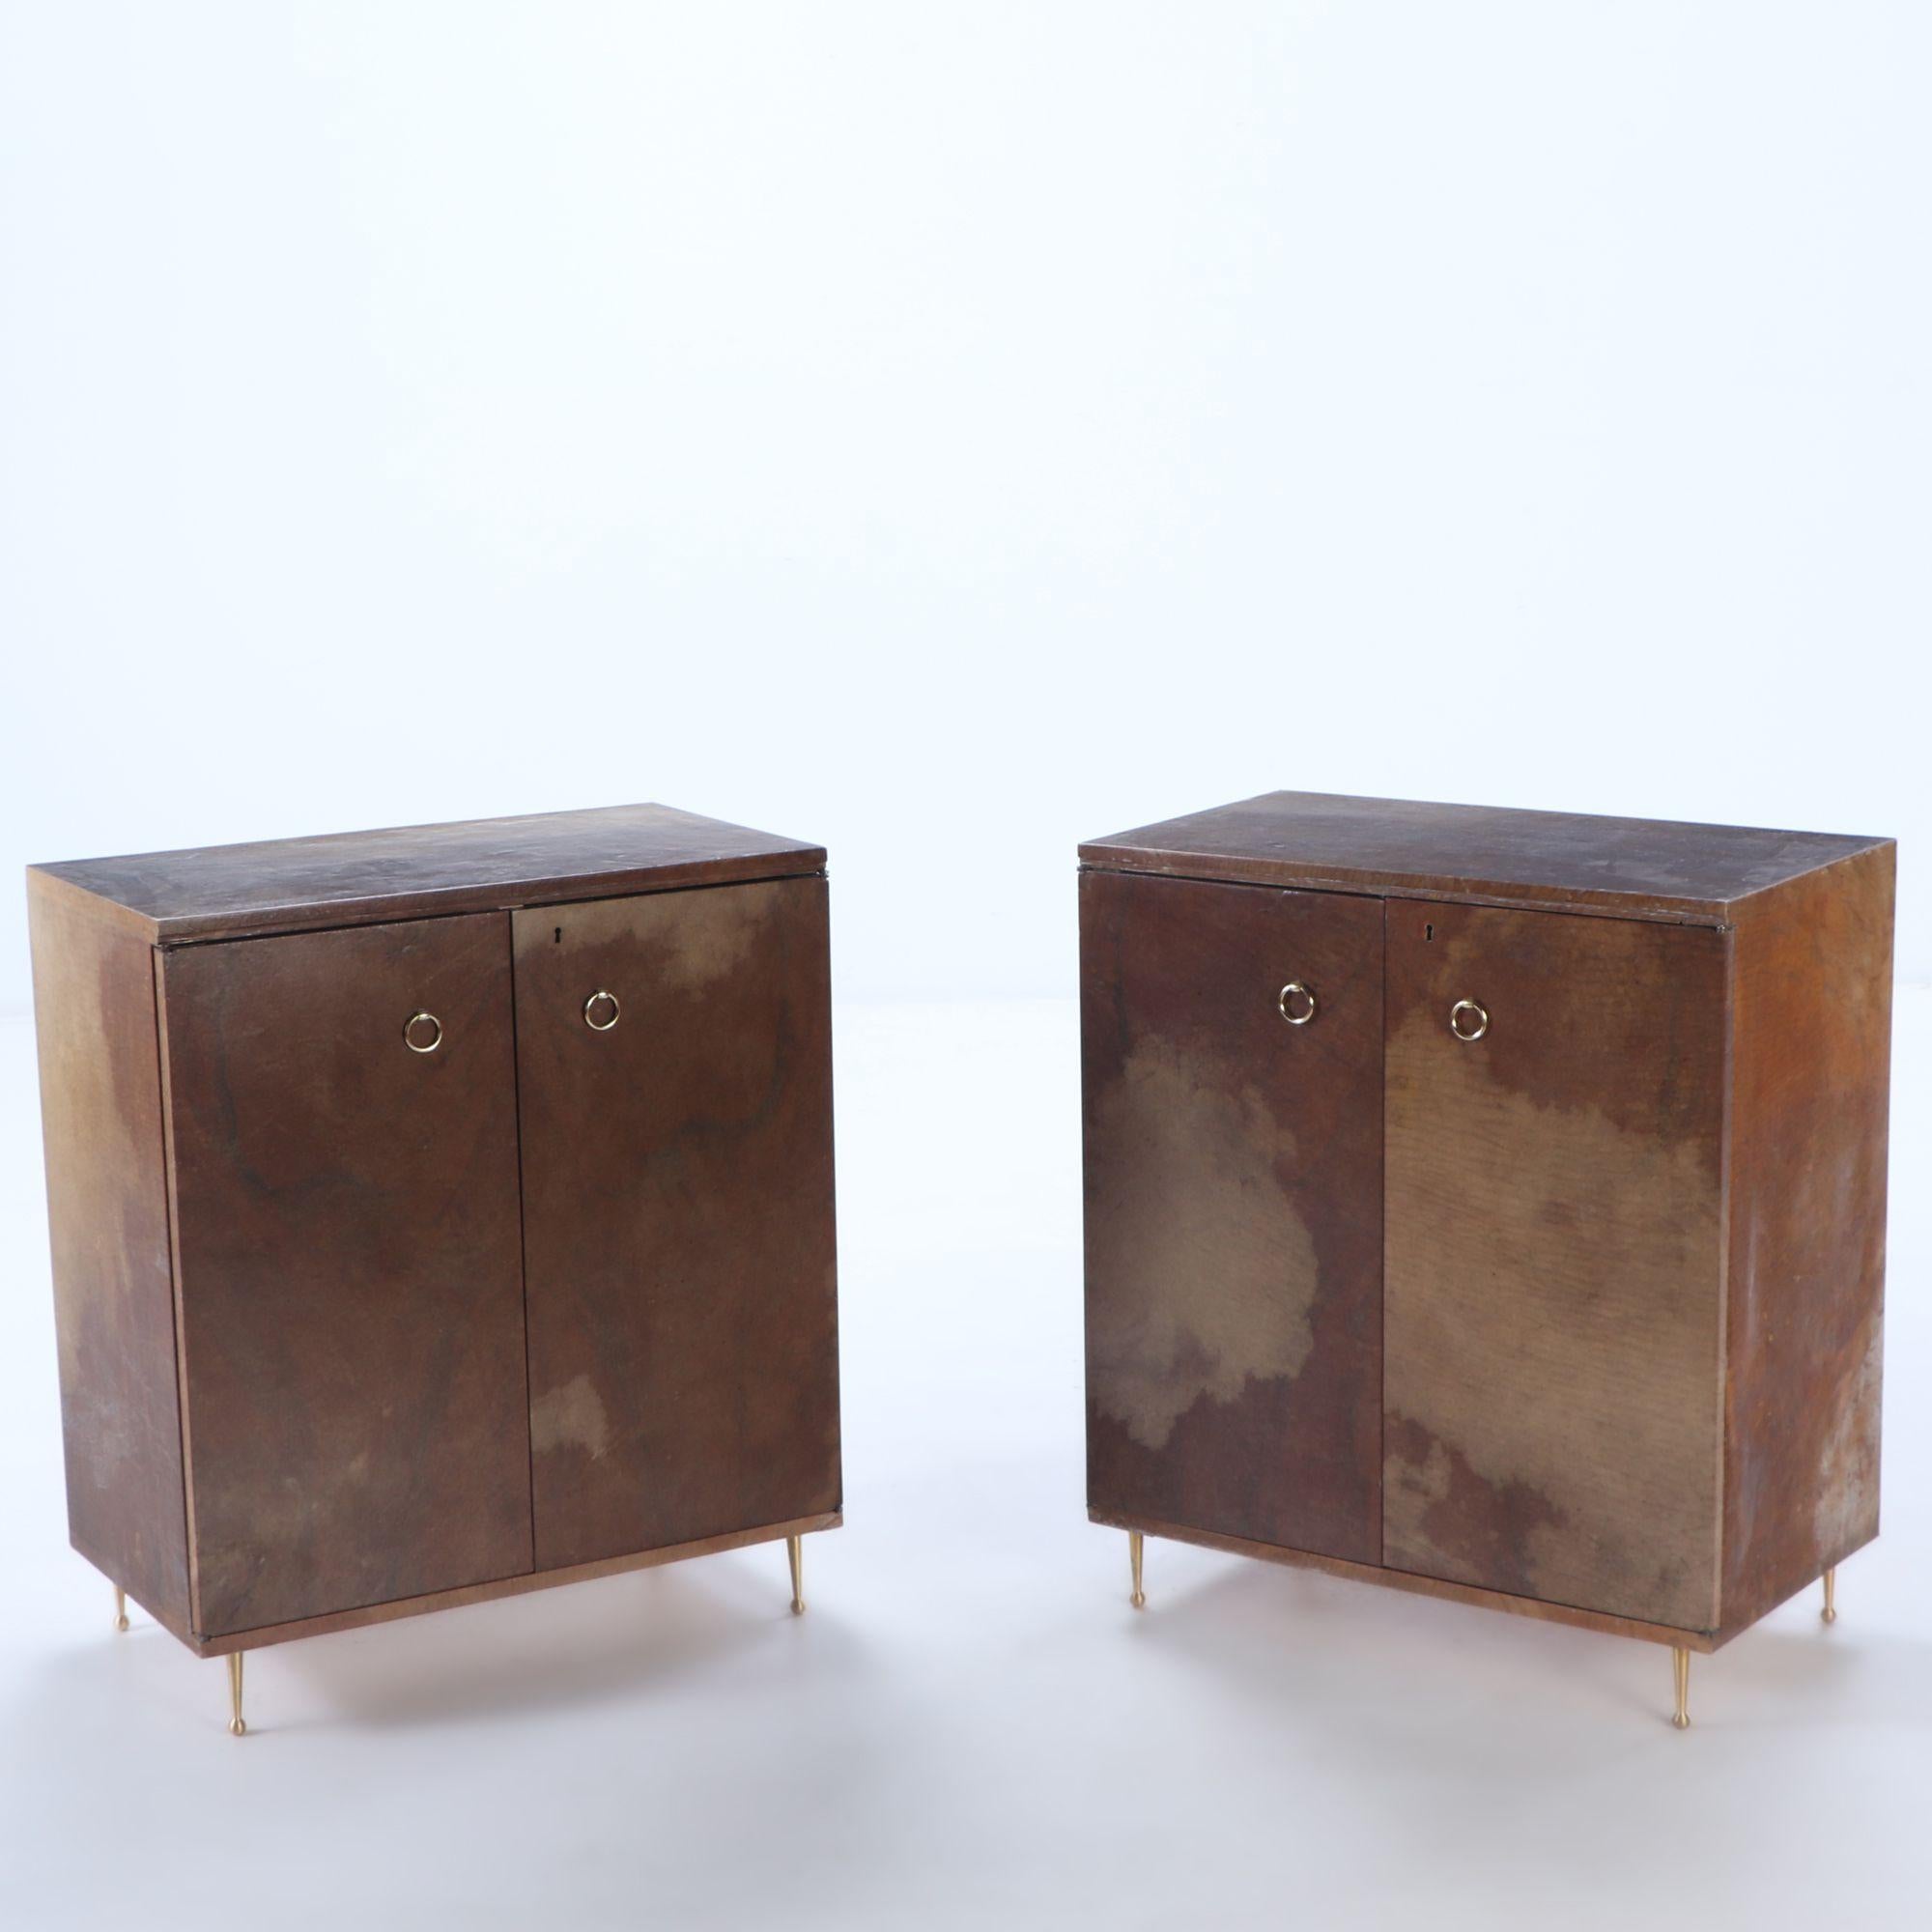 Pair parchment covered two door cabinets C 1950 having adjustable shelves and bronze ring hardware and feet.